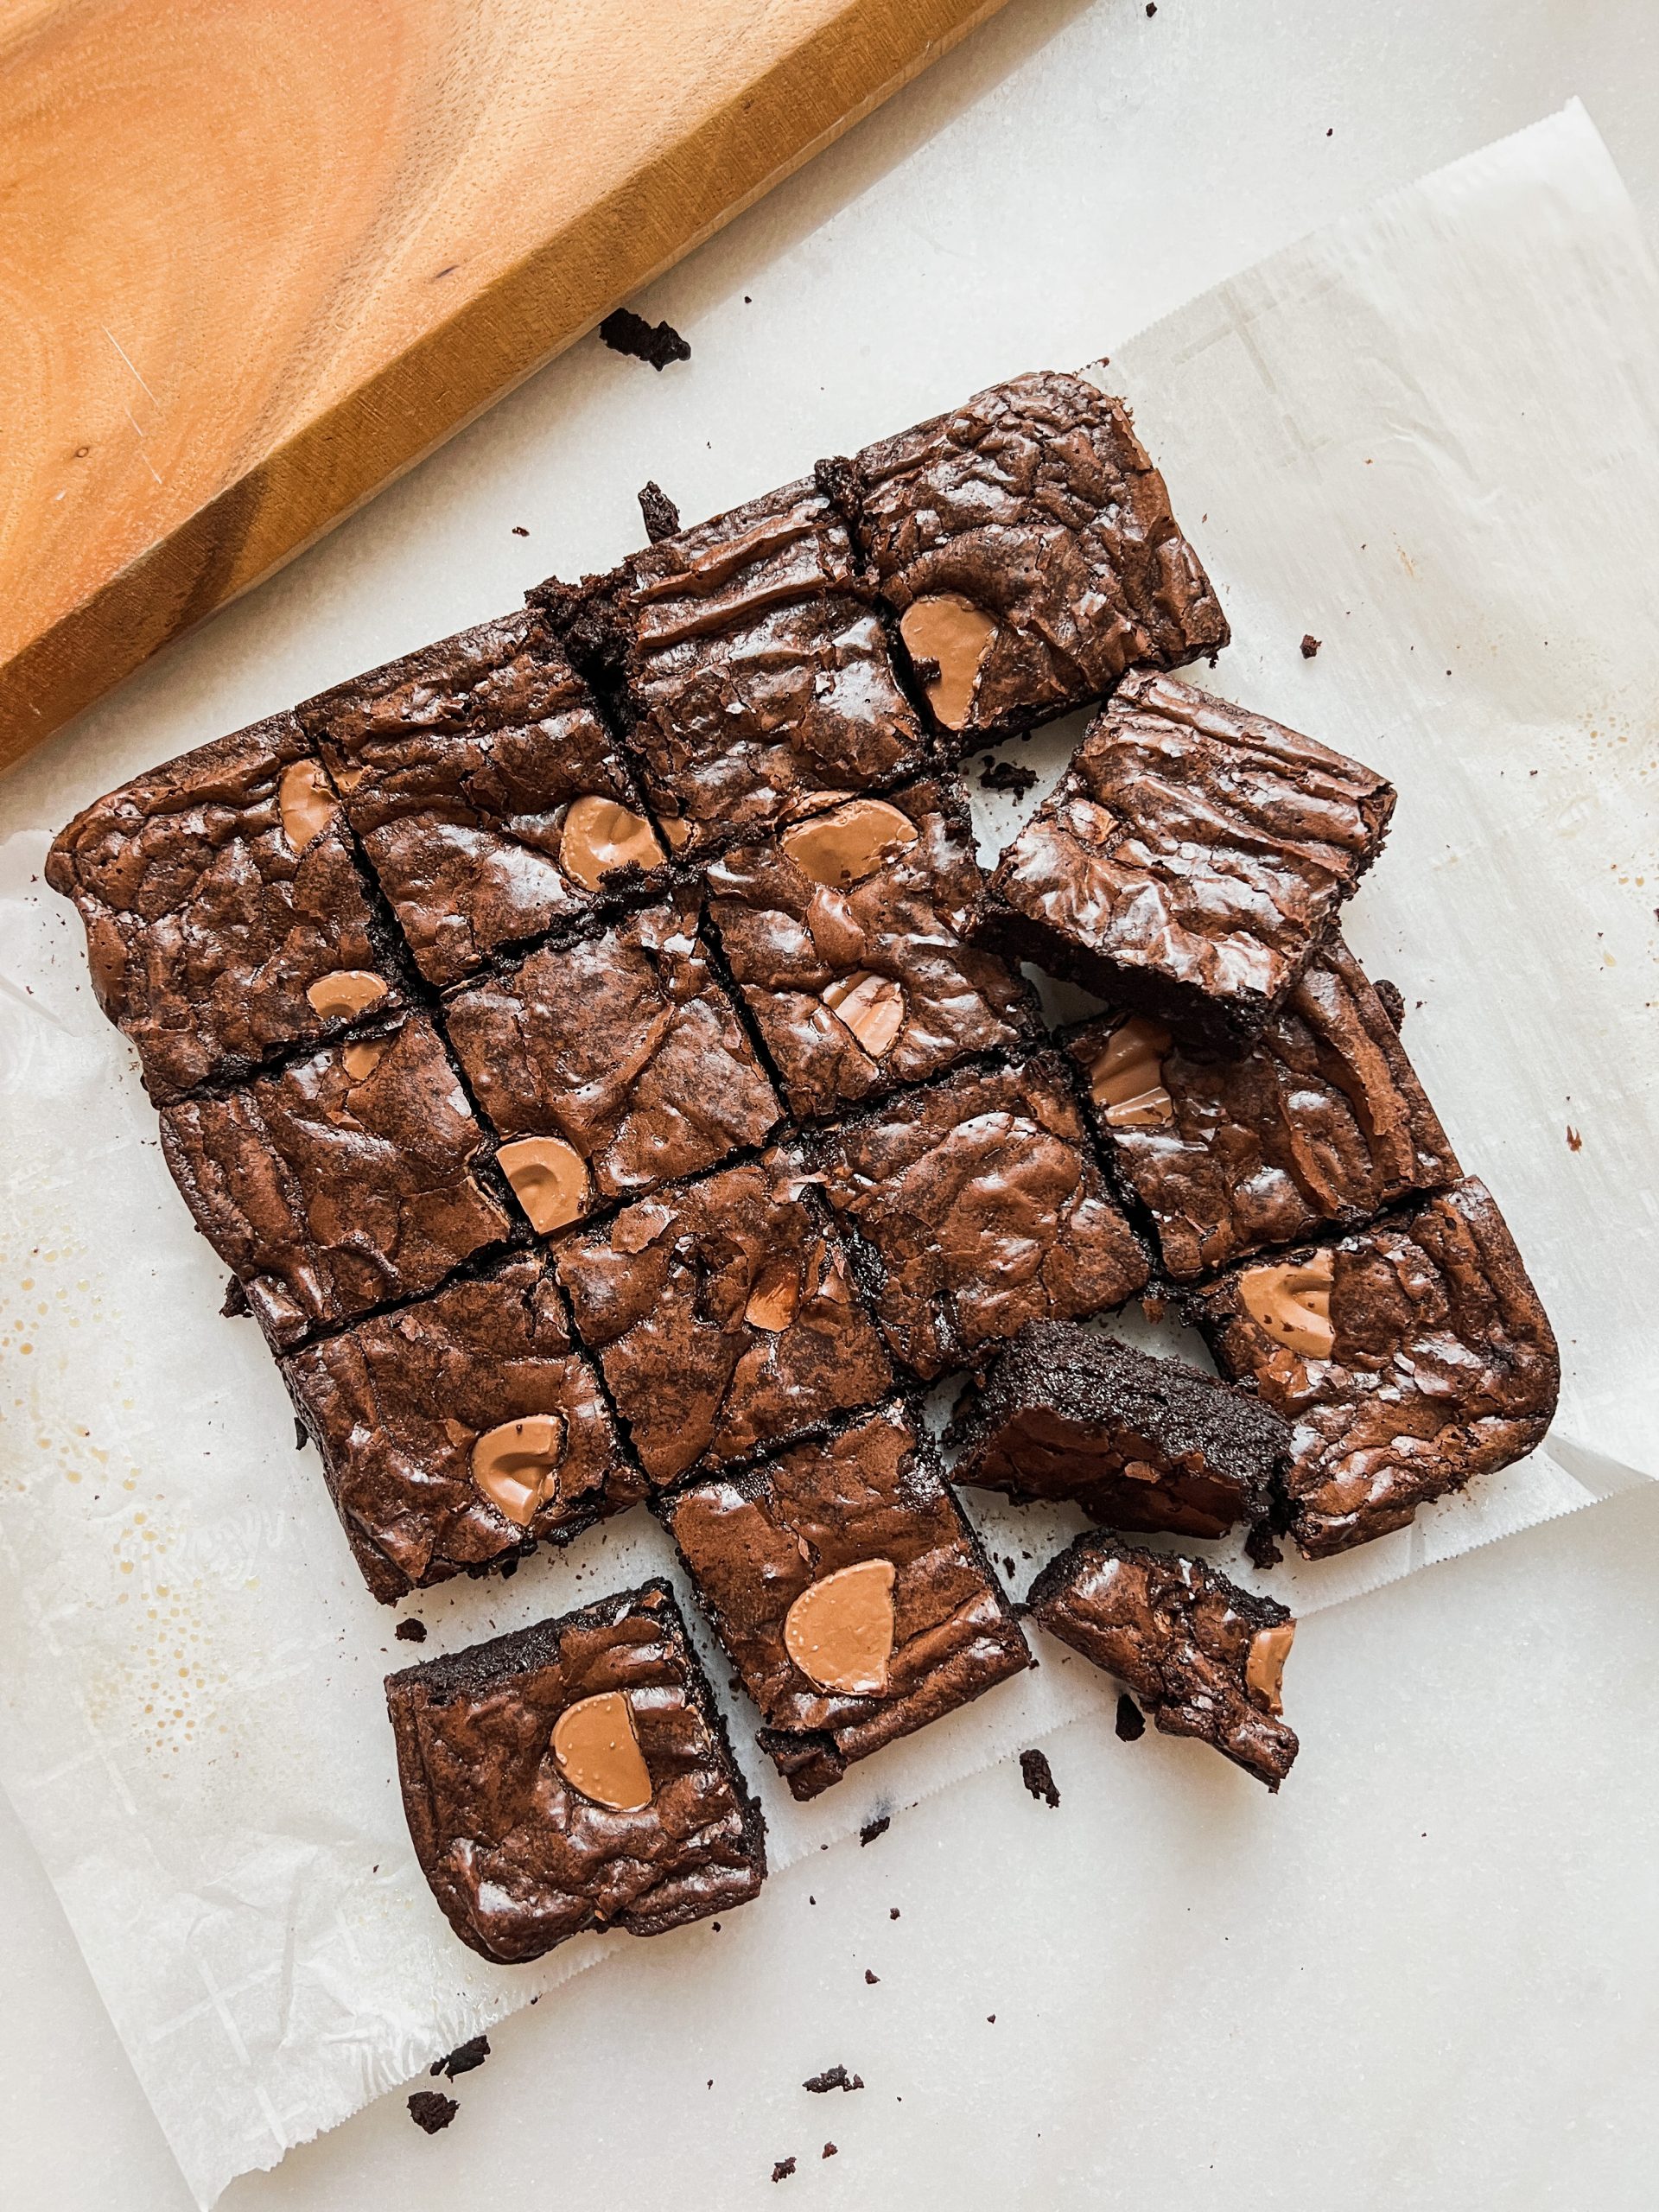 Angled overhead shot of a pan of 16 brownies placed on parchment paper. Brownies have a dark fudgy interior and crinkly shiny top with large chocolate chunks